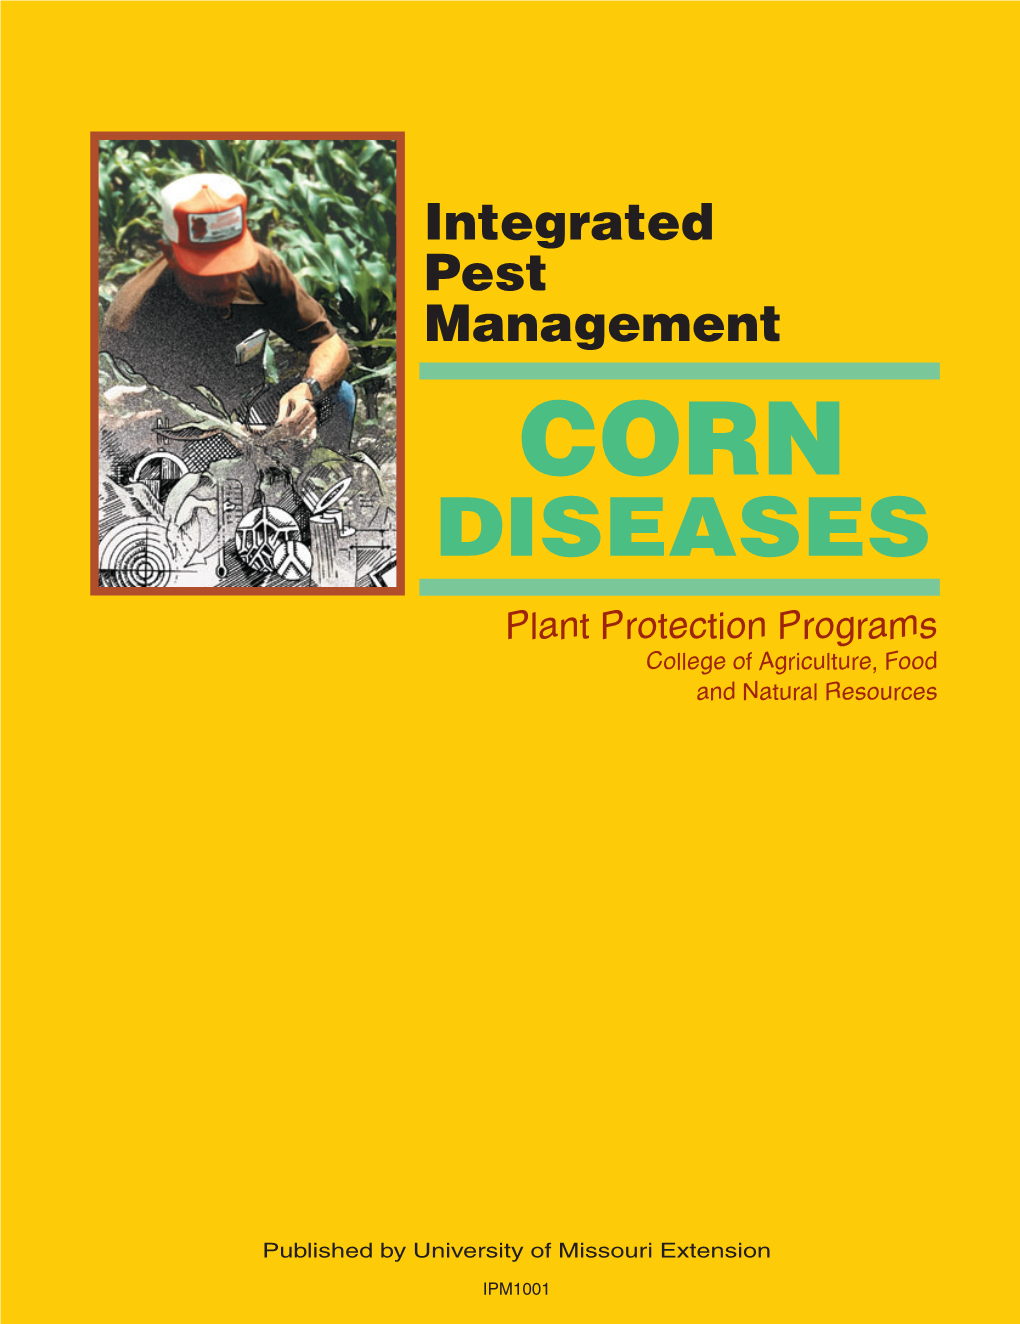 DISEASES Plant Protection Programs College of Agriculture, Food and Natural Resources